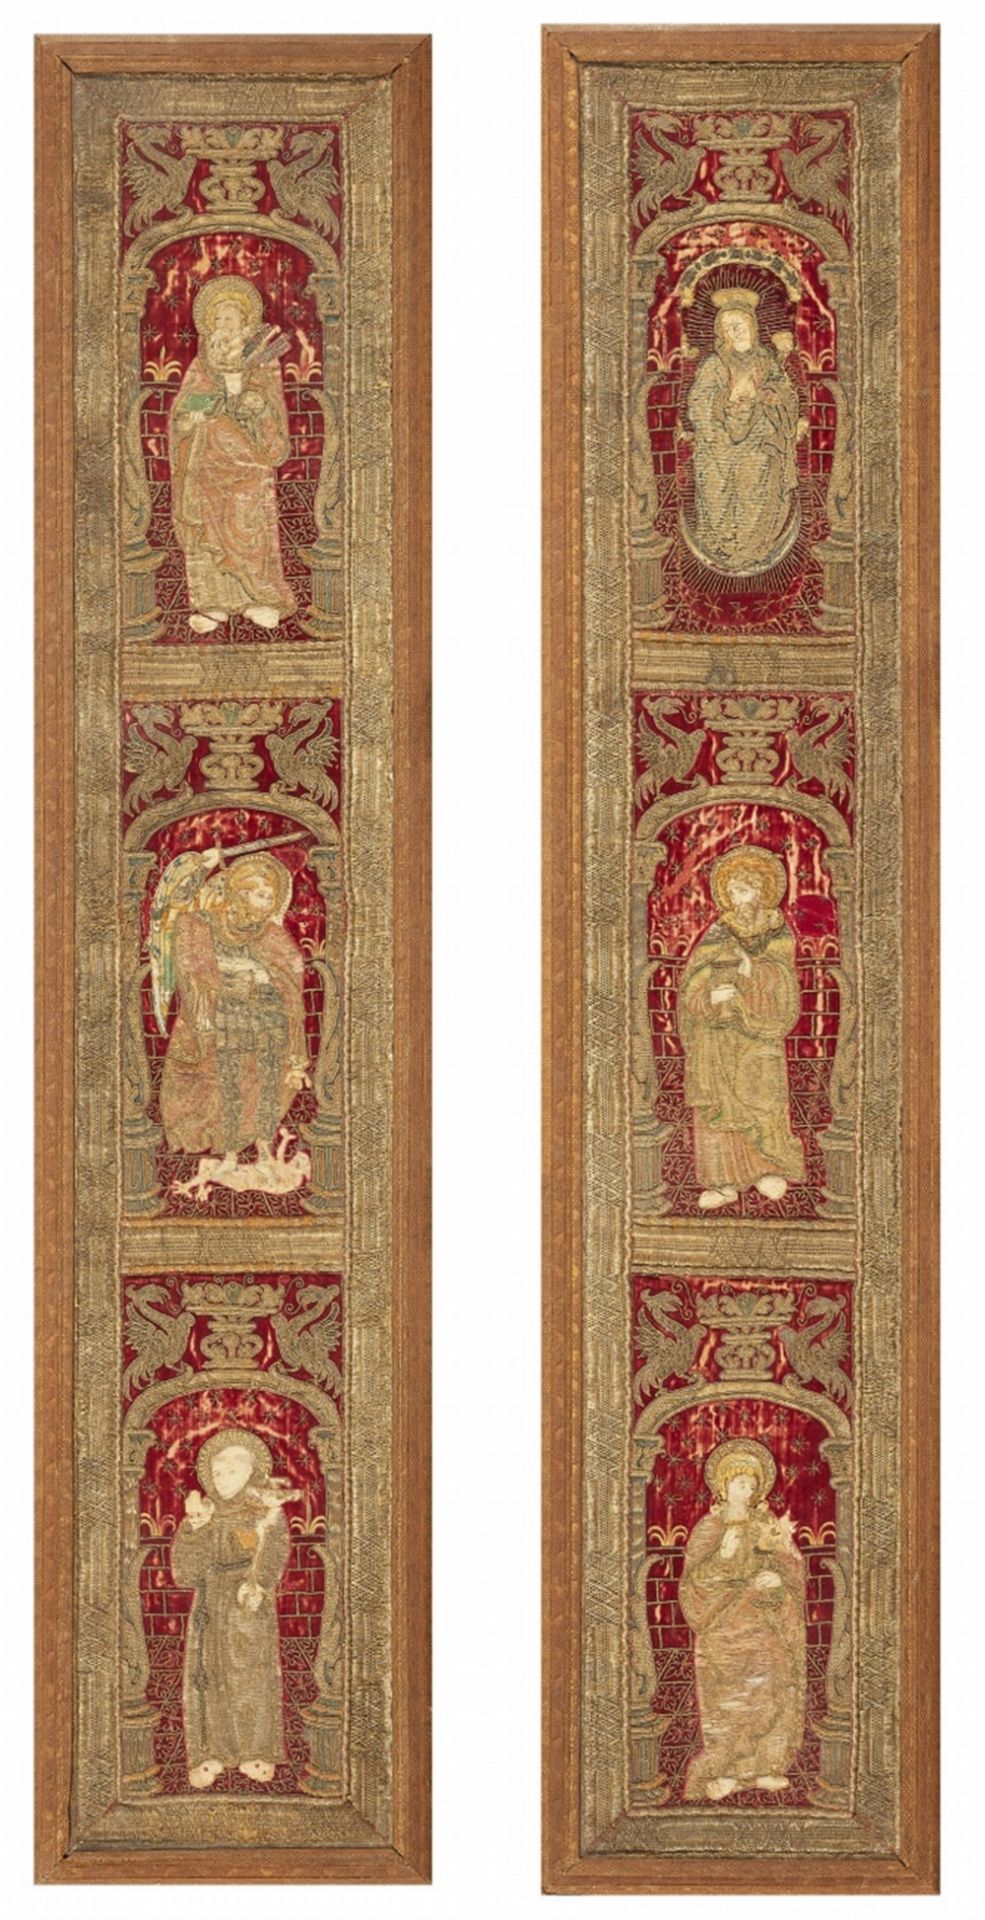 Two embroidered pillar decorations